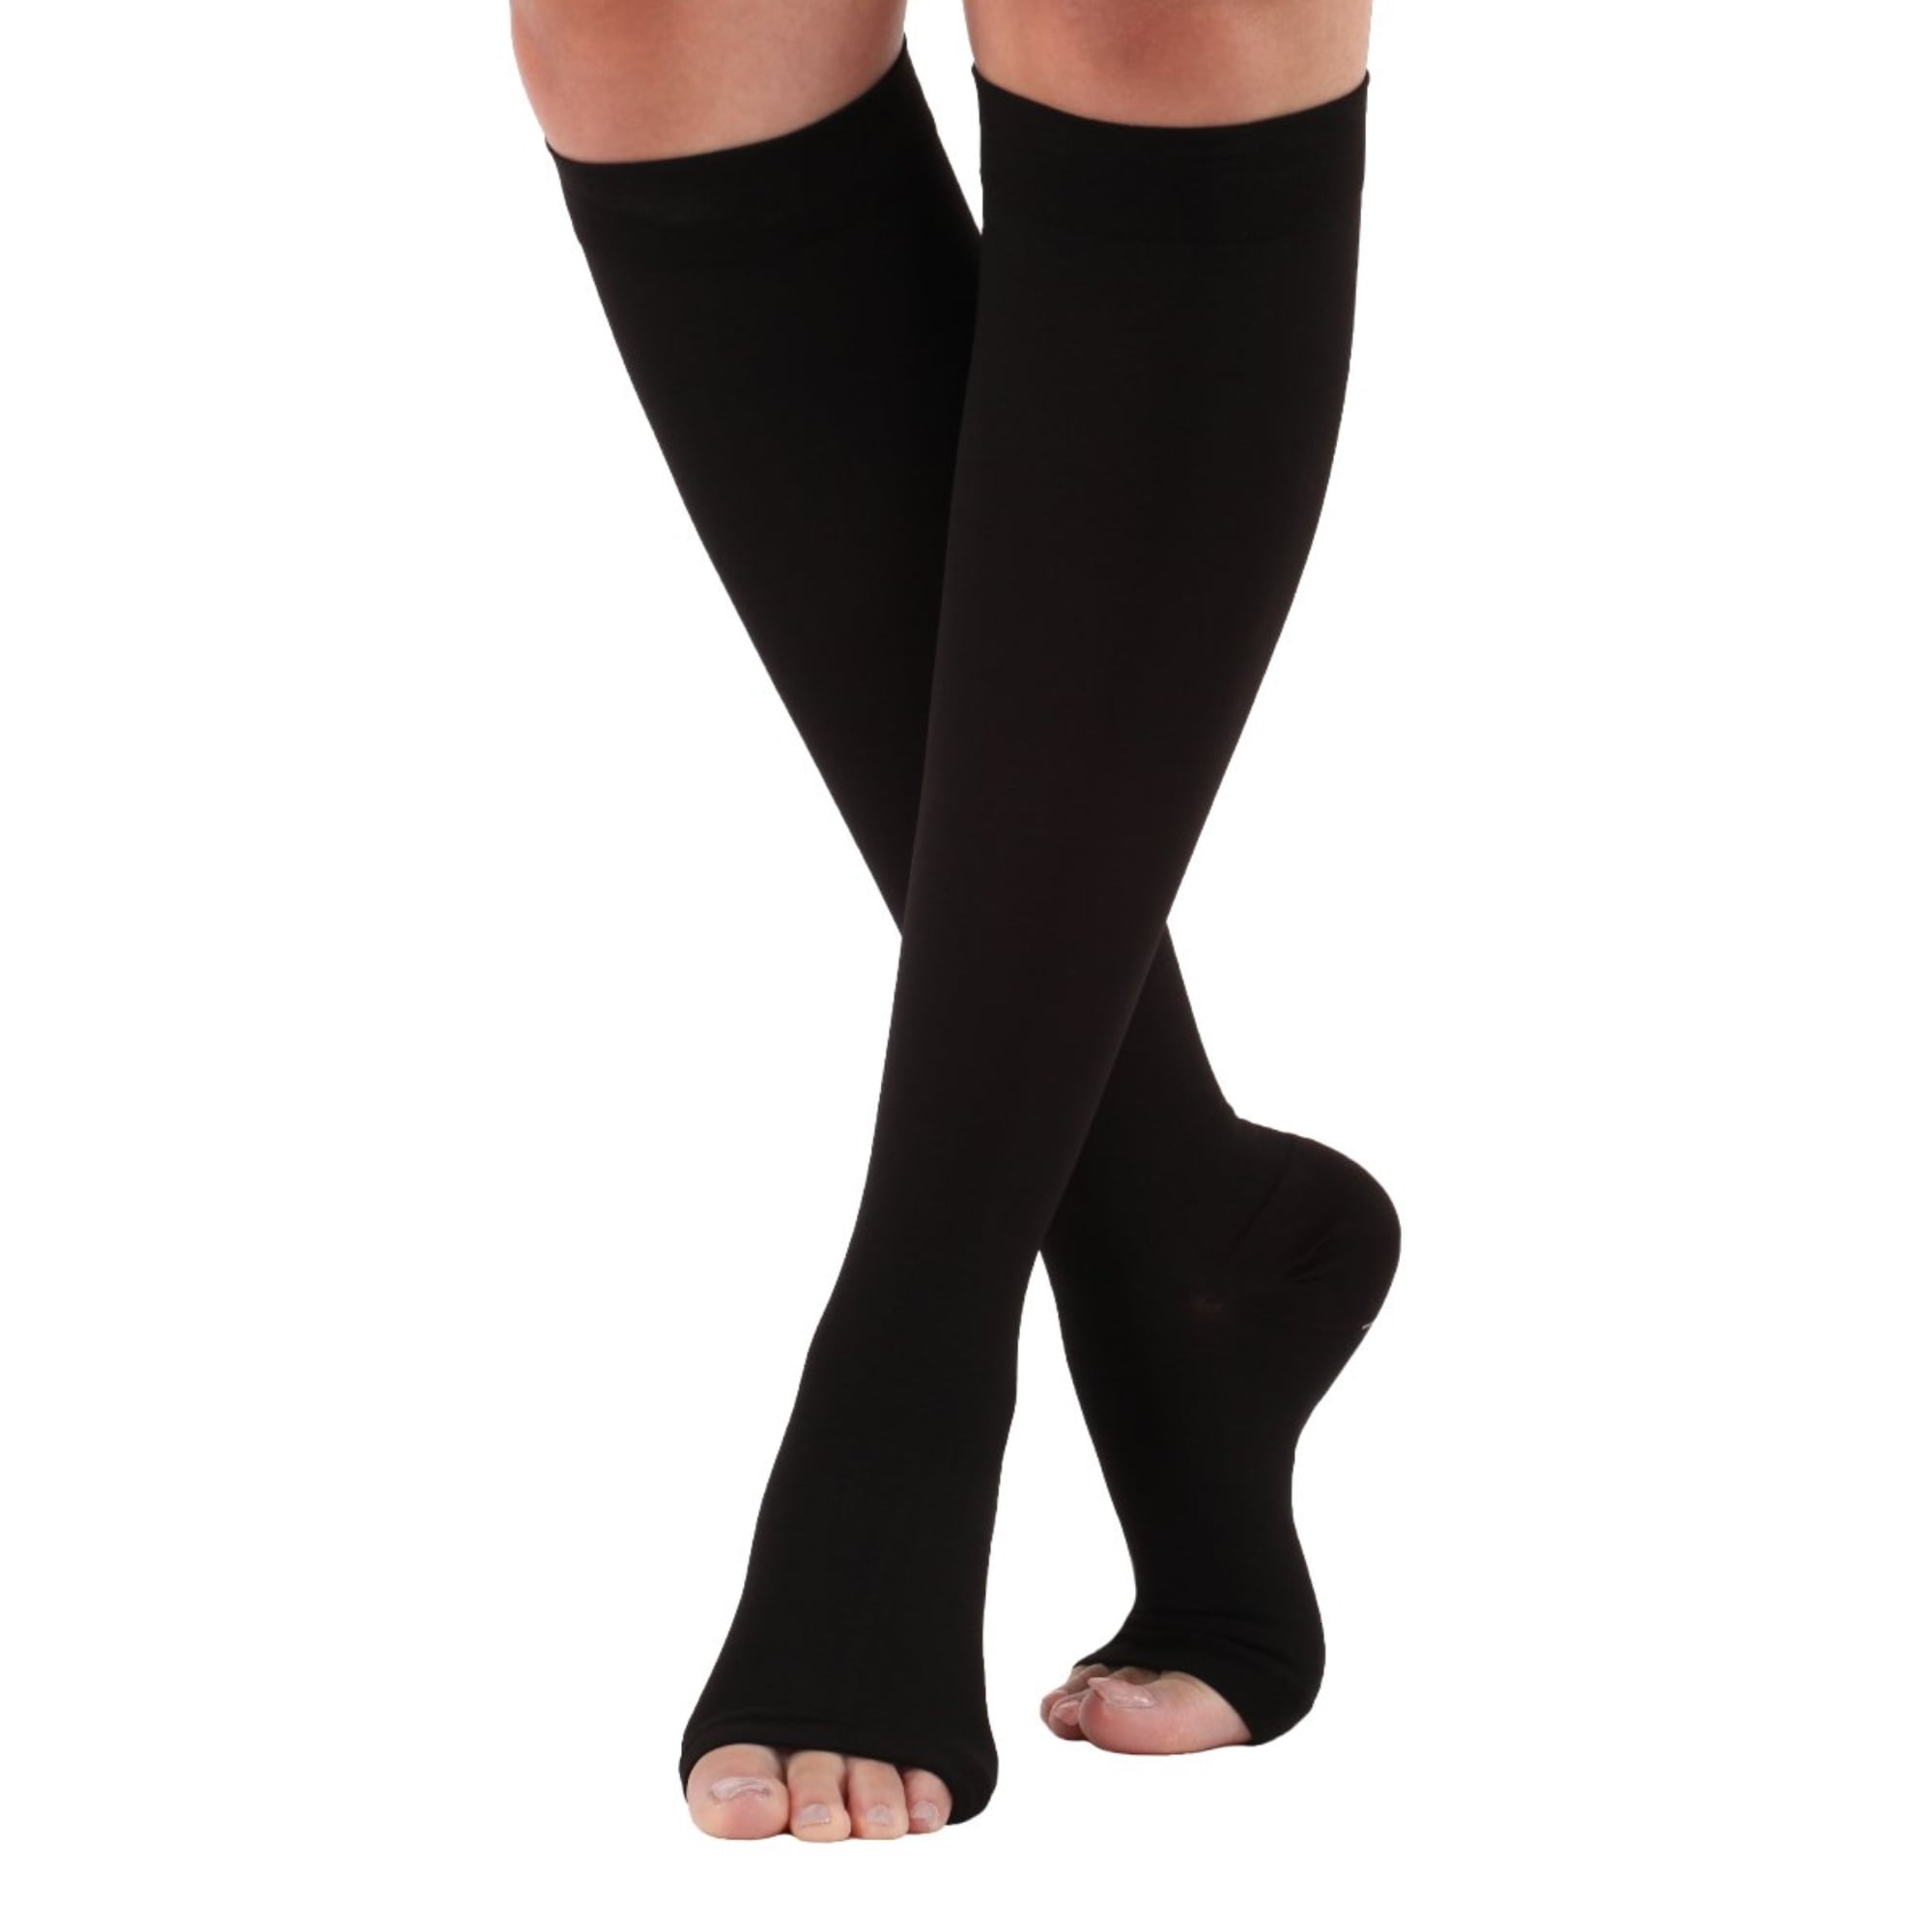 Wide Calf Unisex Compression Stockings 30-40mmHg with Open Toe - Black ...